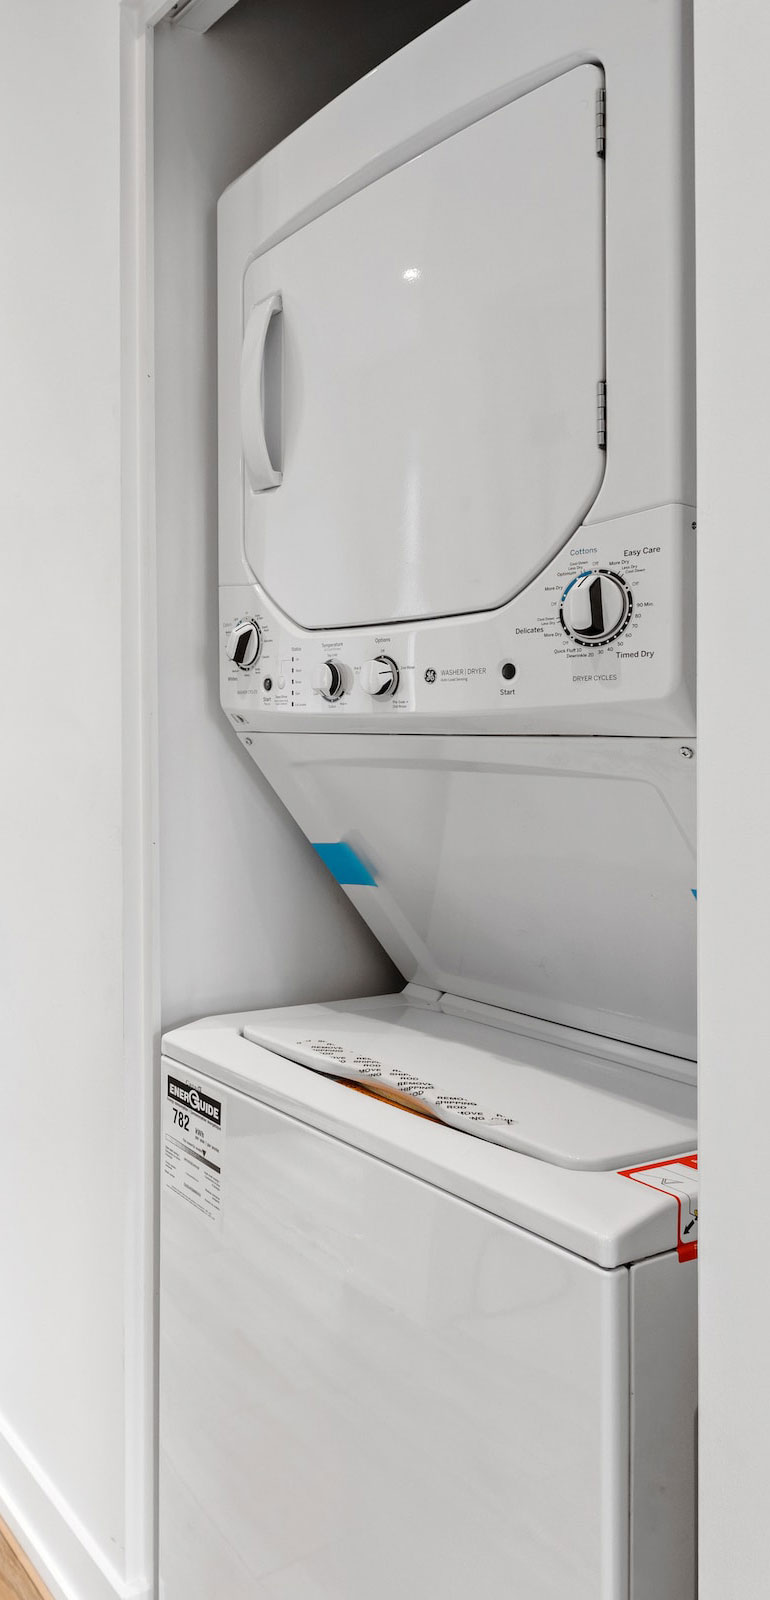 Tumble dryer and washer dryer, repair and new installations, for Wolverhampton and Stafford areas